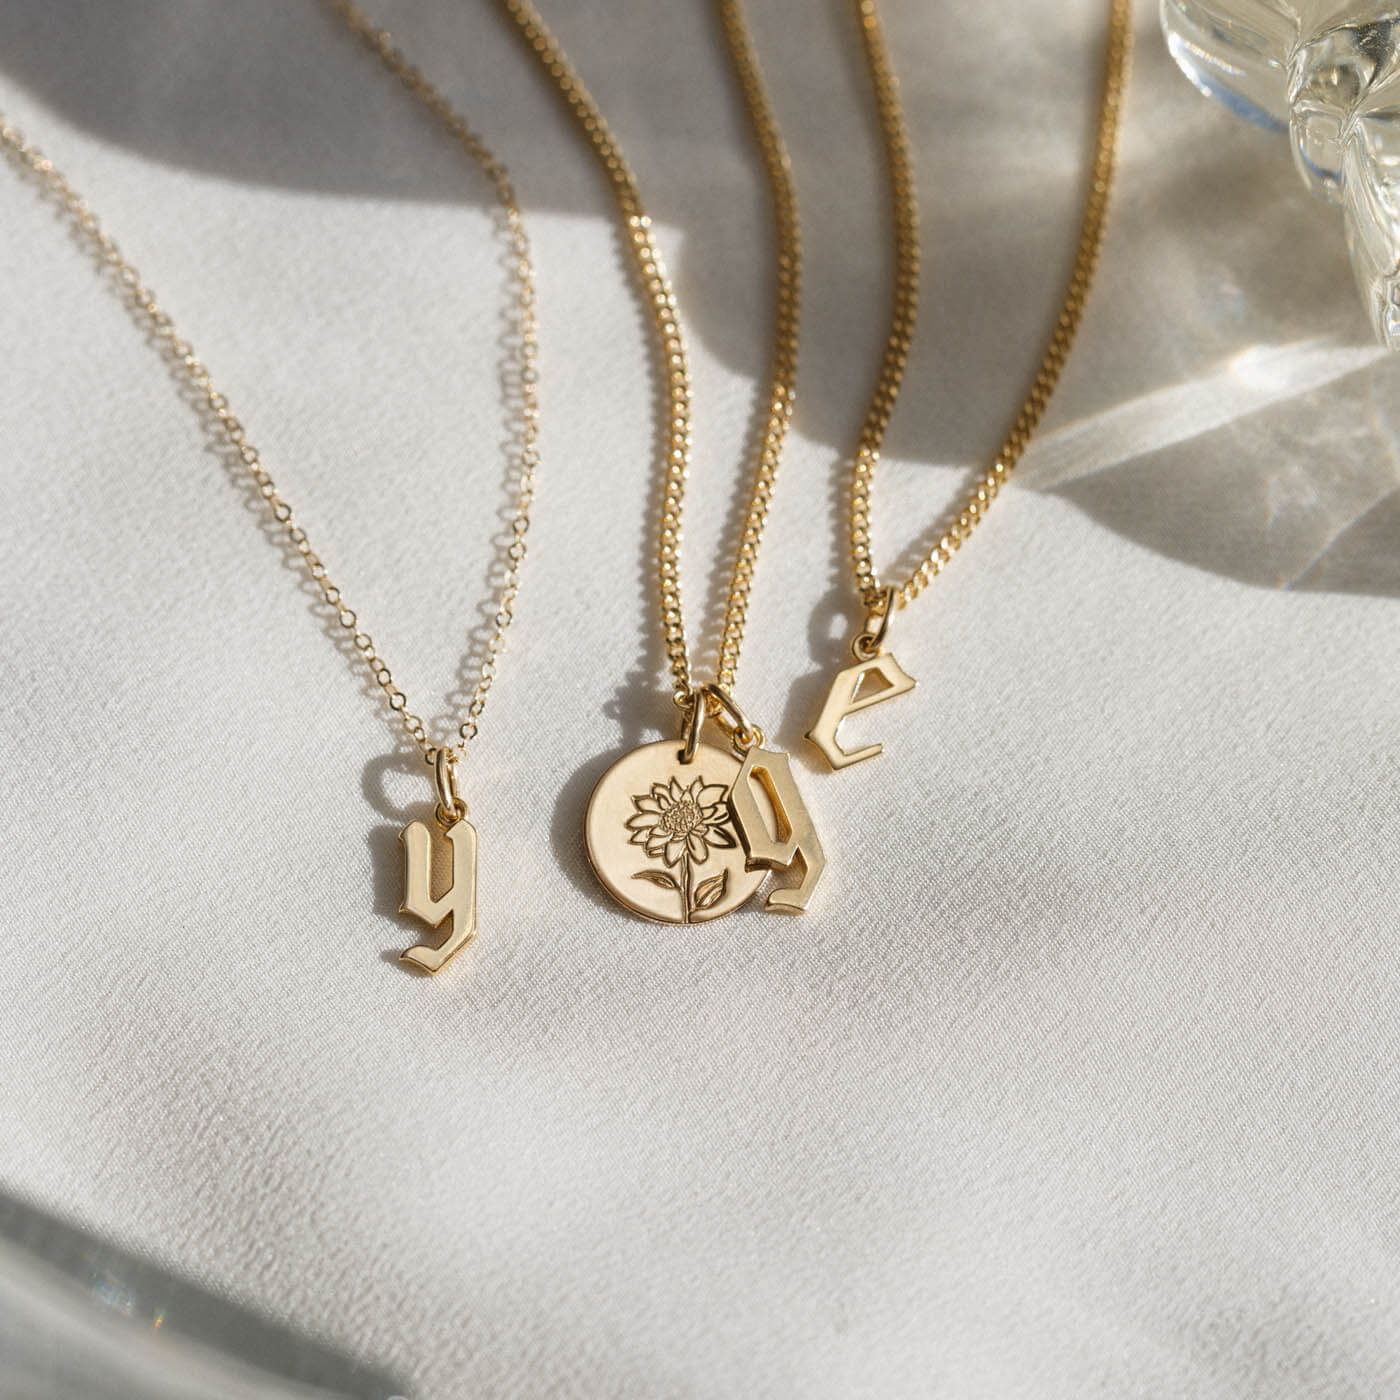 Personalized Initial Necklace Gold Gothic Monogram Charm 